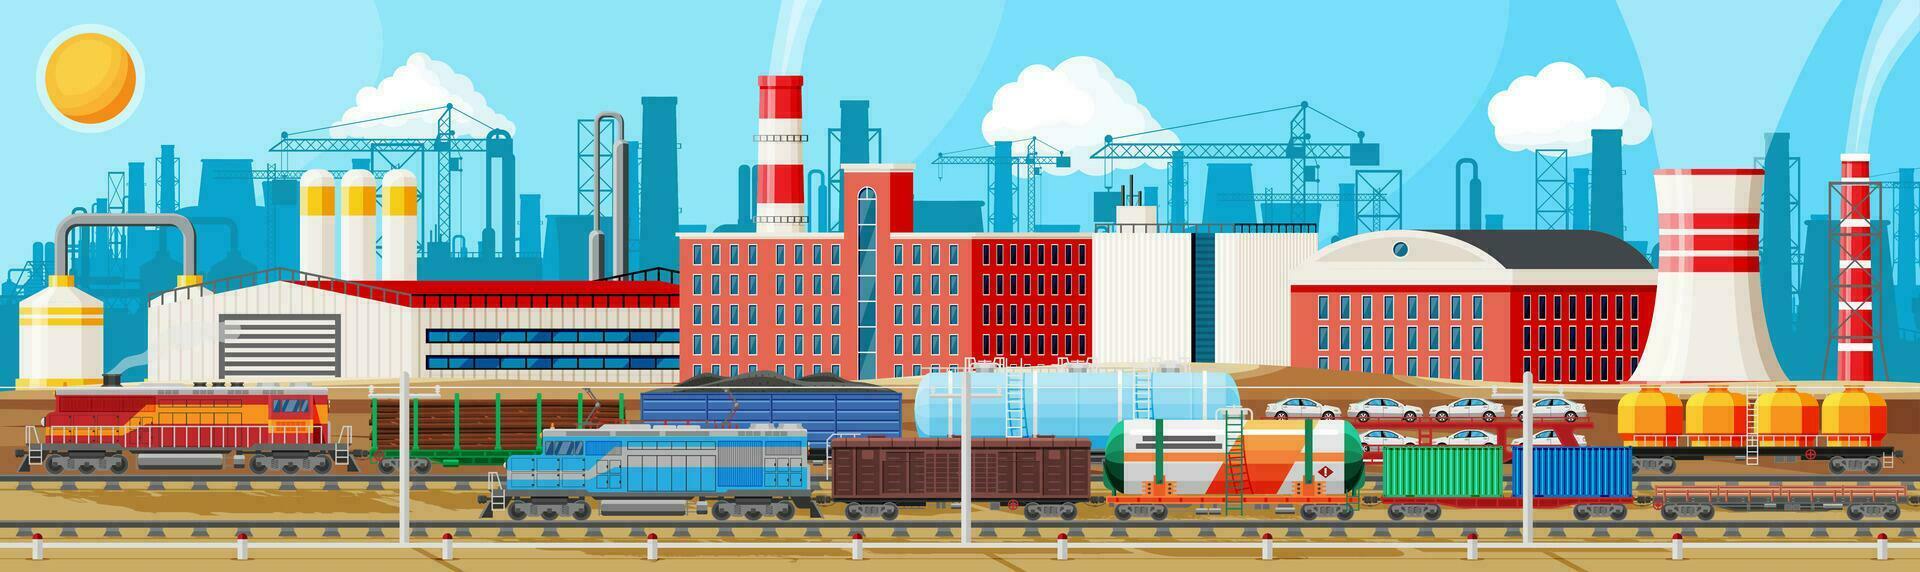 Industrial Landscape Of Cargo Rail Transportation With Plant And Fuming Pipes. Factory Building. Pipes, Buildings, Warehouse, Freight Railway Station. Cityscape Urban Skyline. Flat Vector Illustration